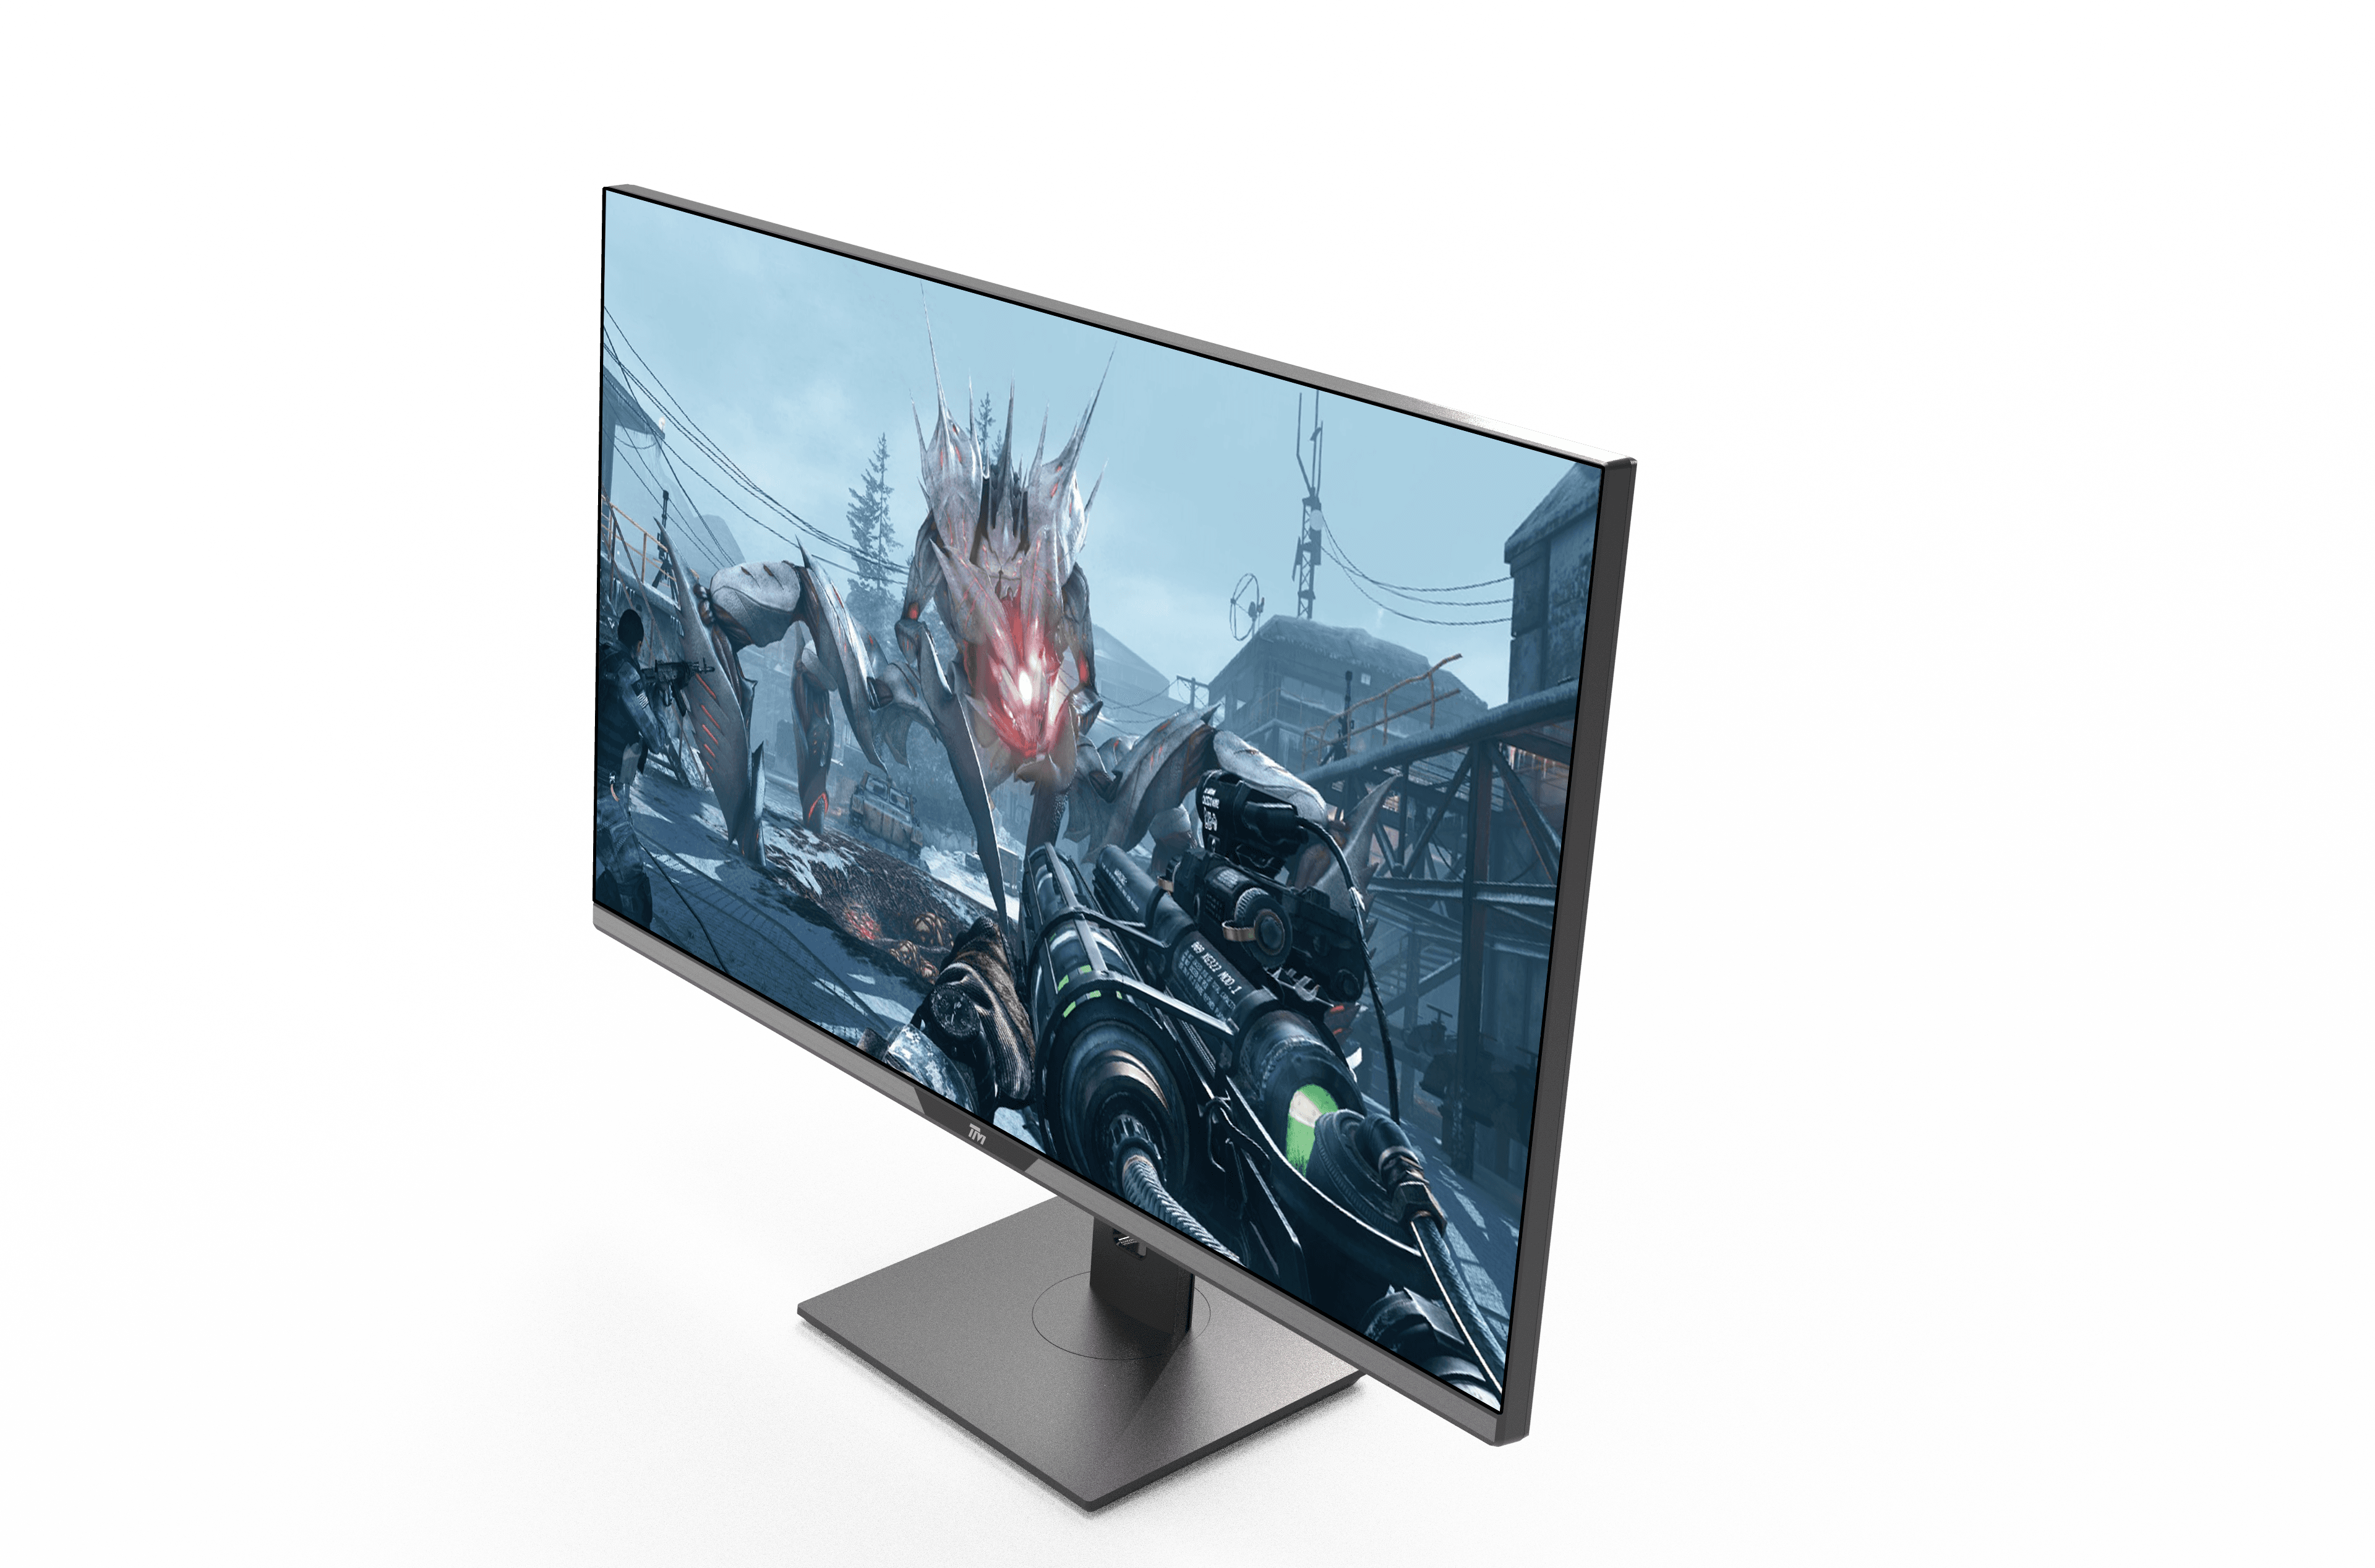 Twisted Minds Gaming Monitor 32